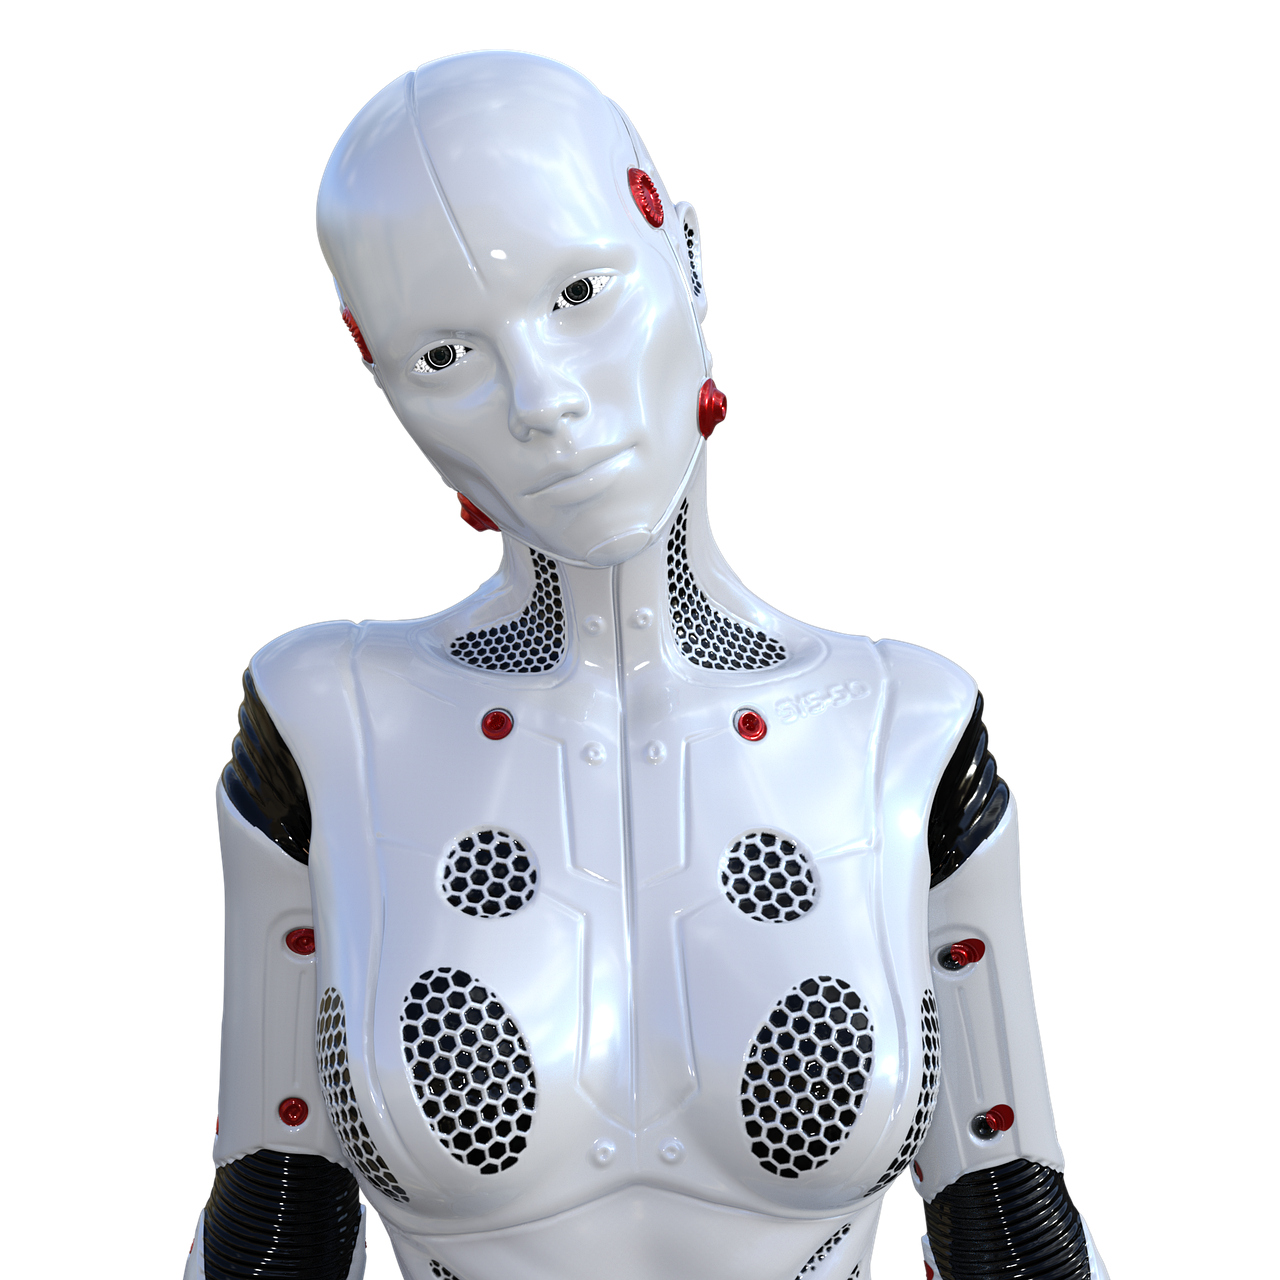 Download Free Photo Of Cyborgrobotscience Fictionartificialhumanoid From